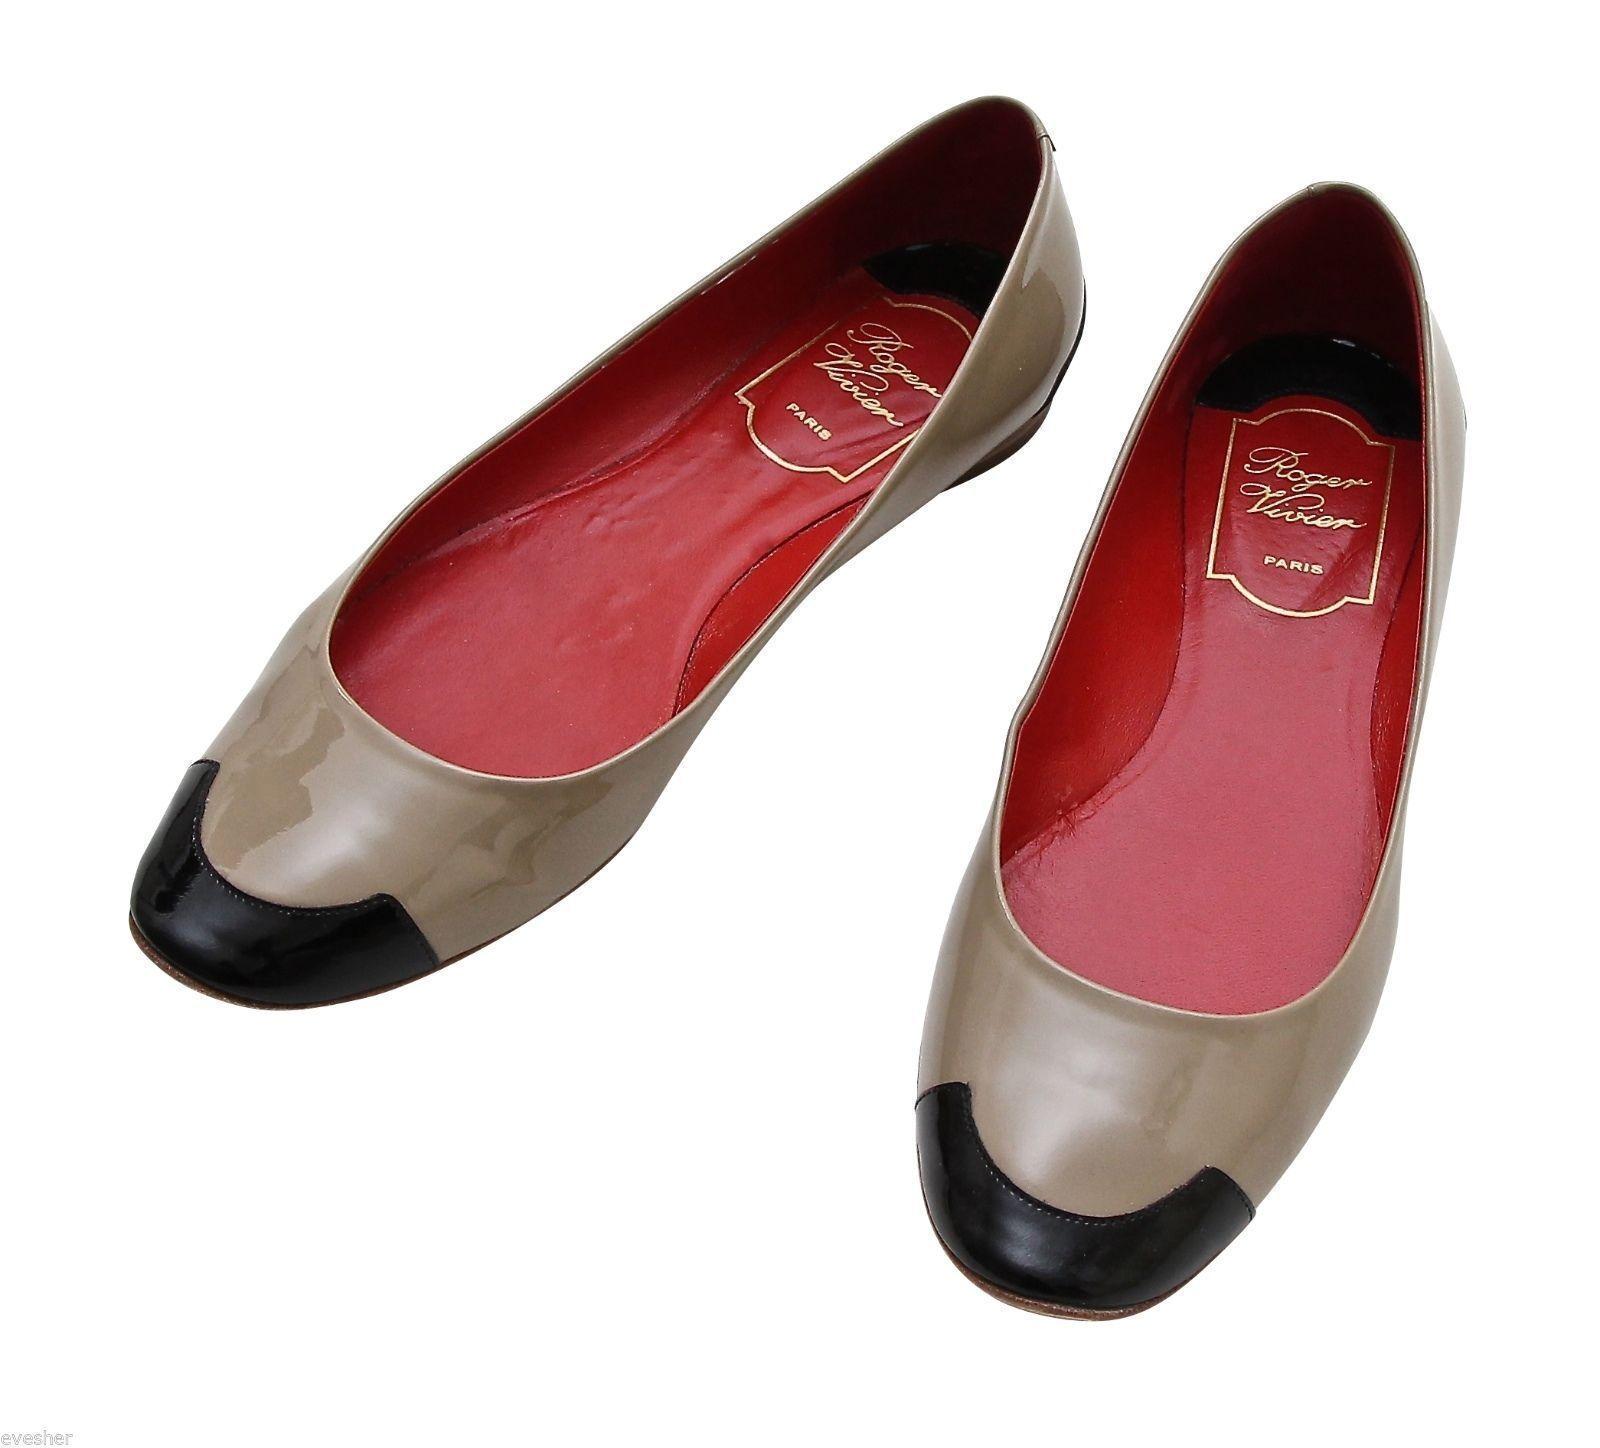 ROGER VIVIER Ballet Flat Heel Shoe Patent Leather Taupe Black HELLO COCO T.05 37 In Good Condition For Sale In Hollywood, FL